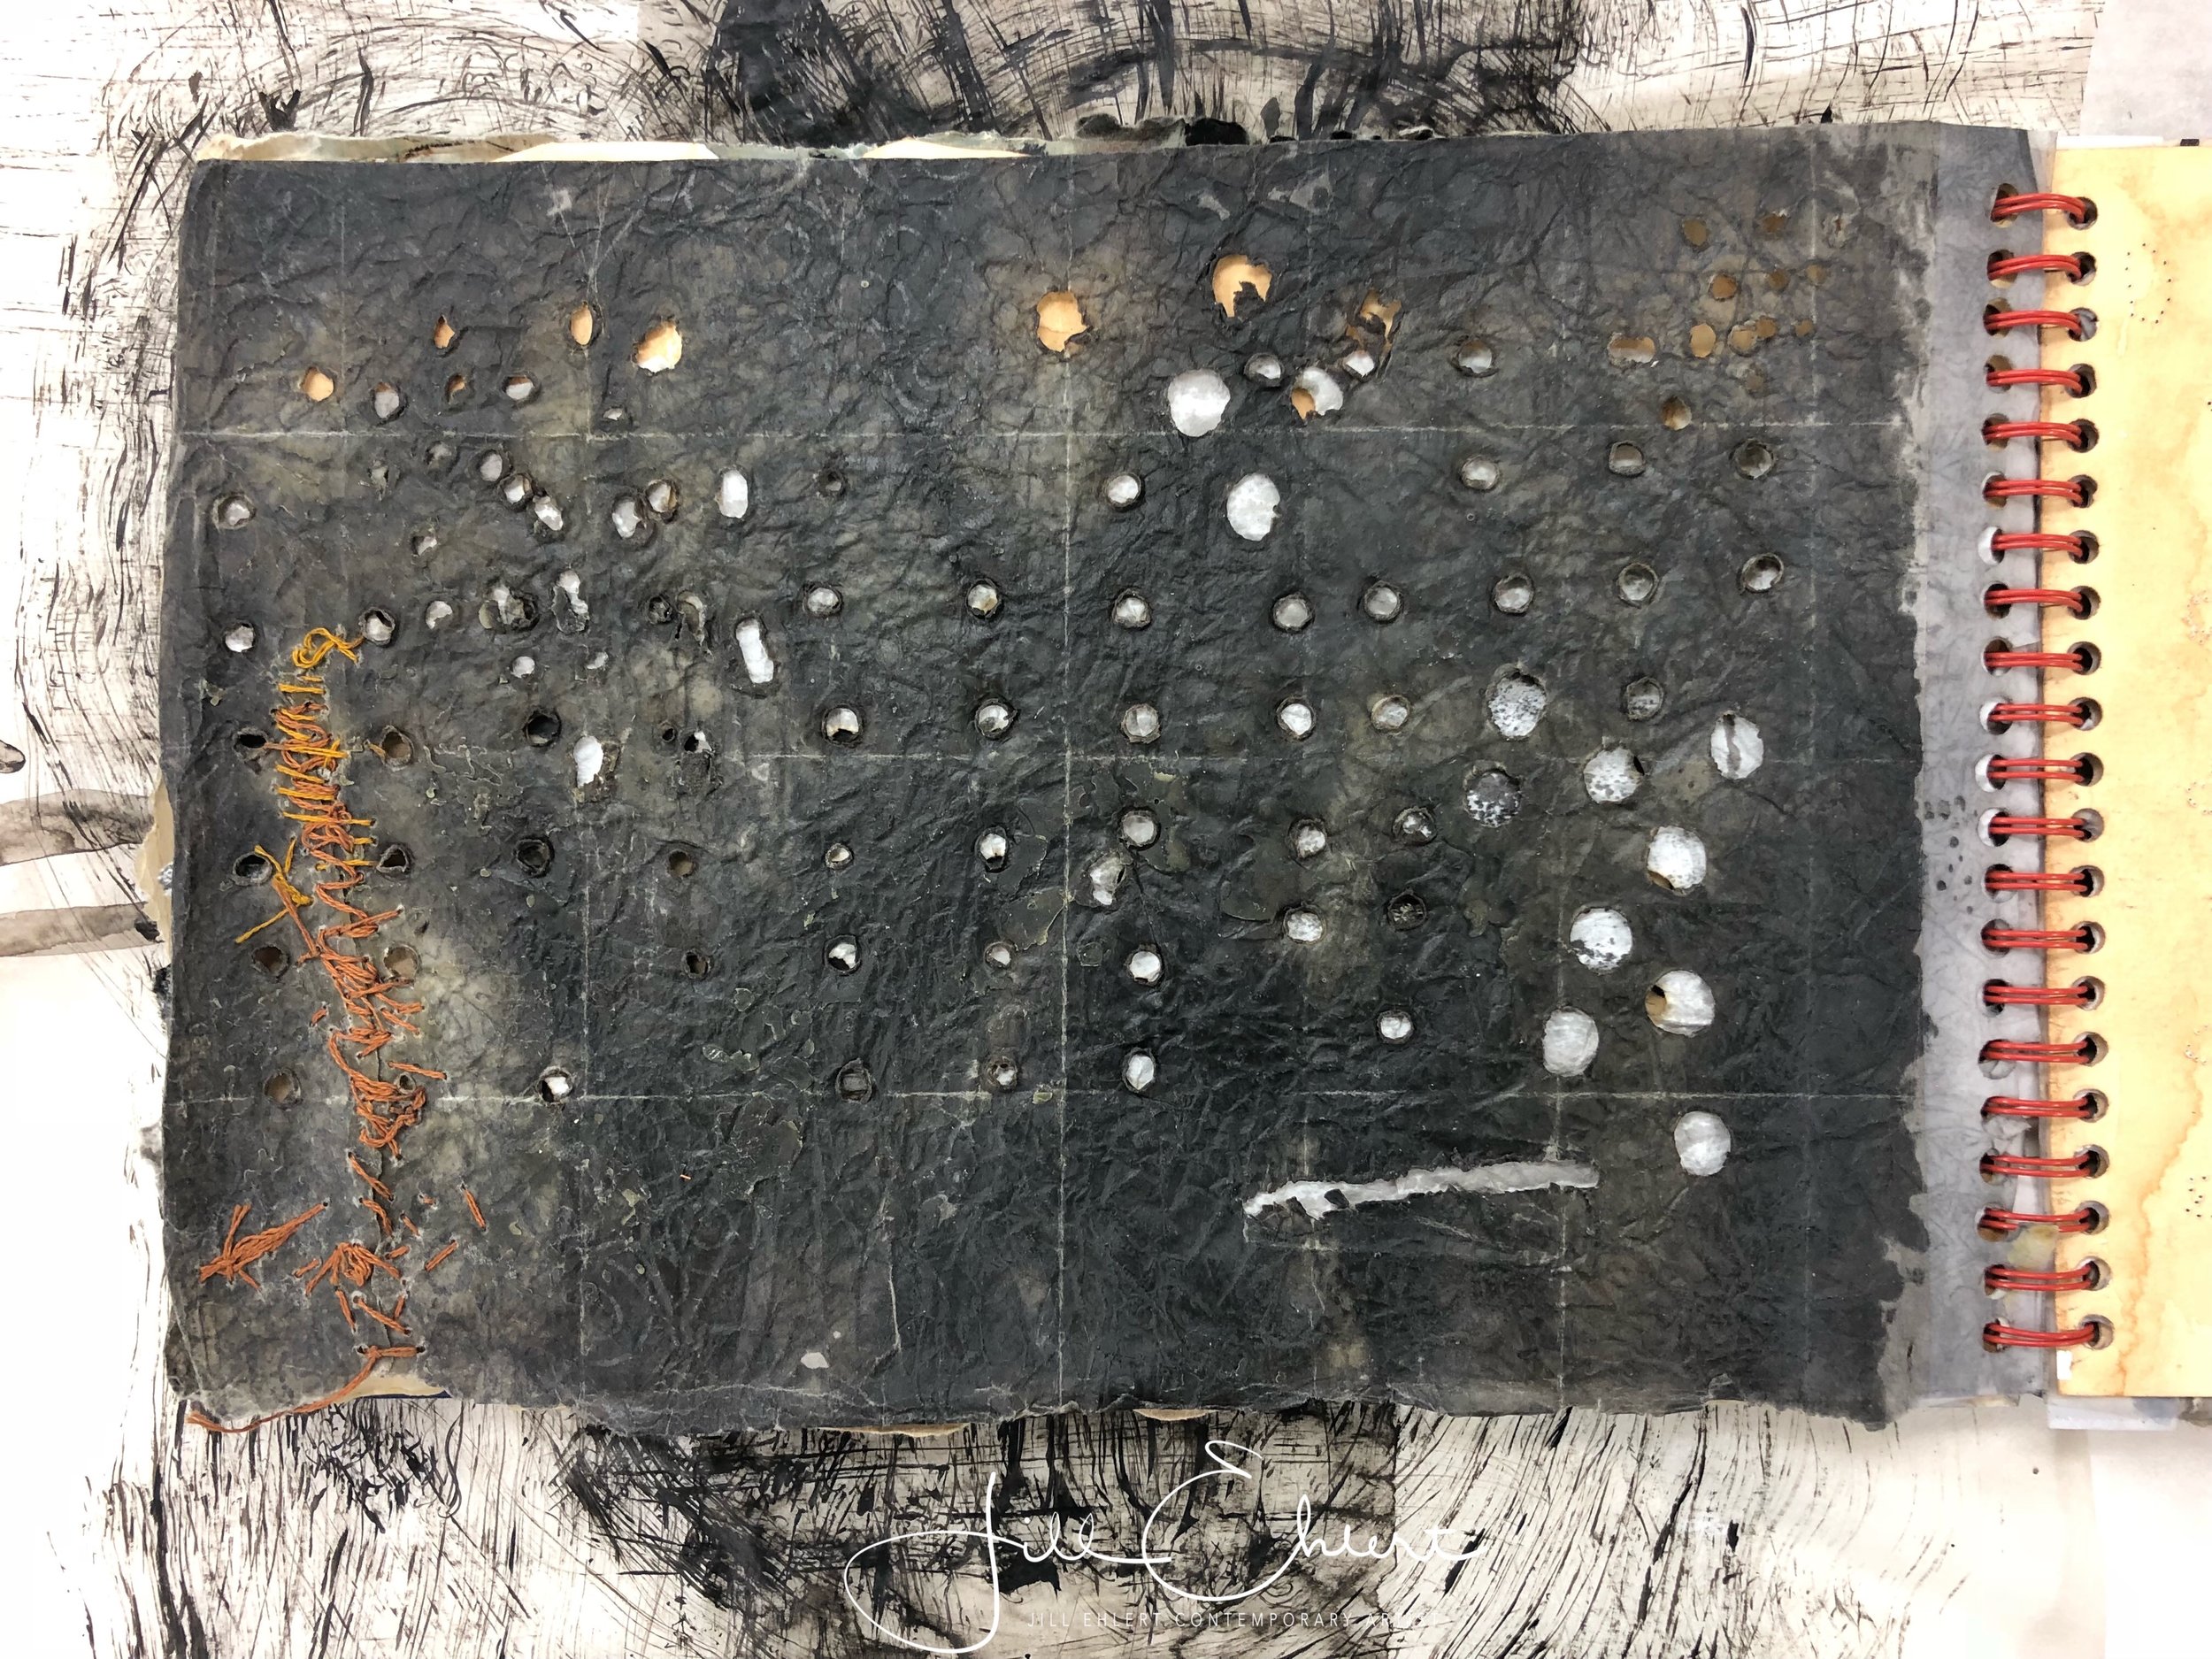 Beeswax over graphite. Punched holes. Sewing with thread.